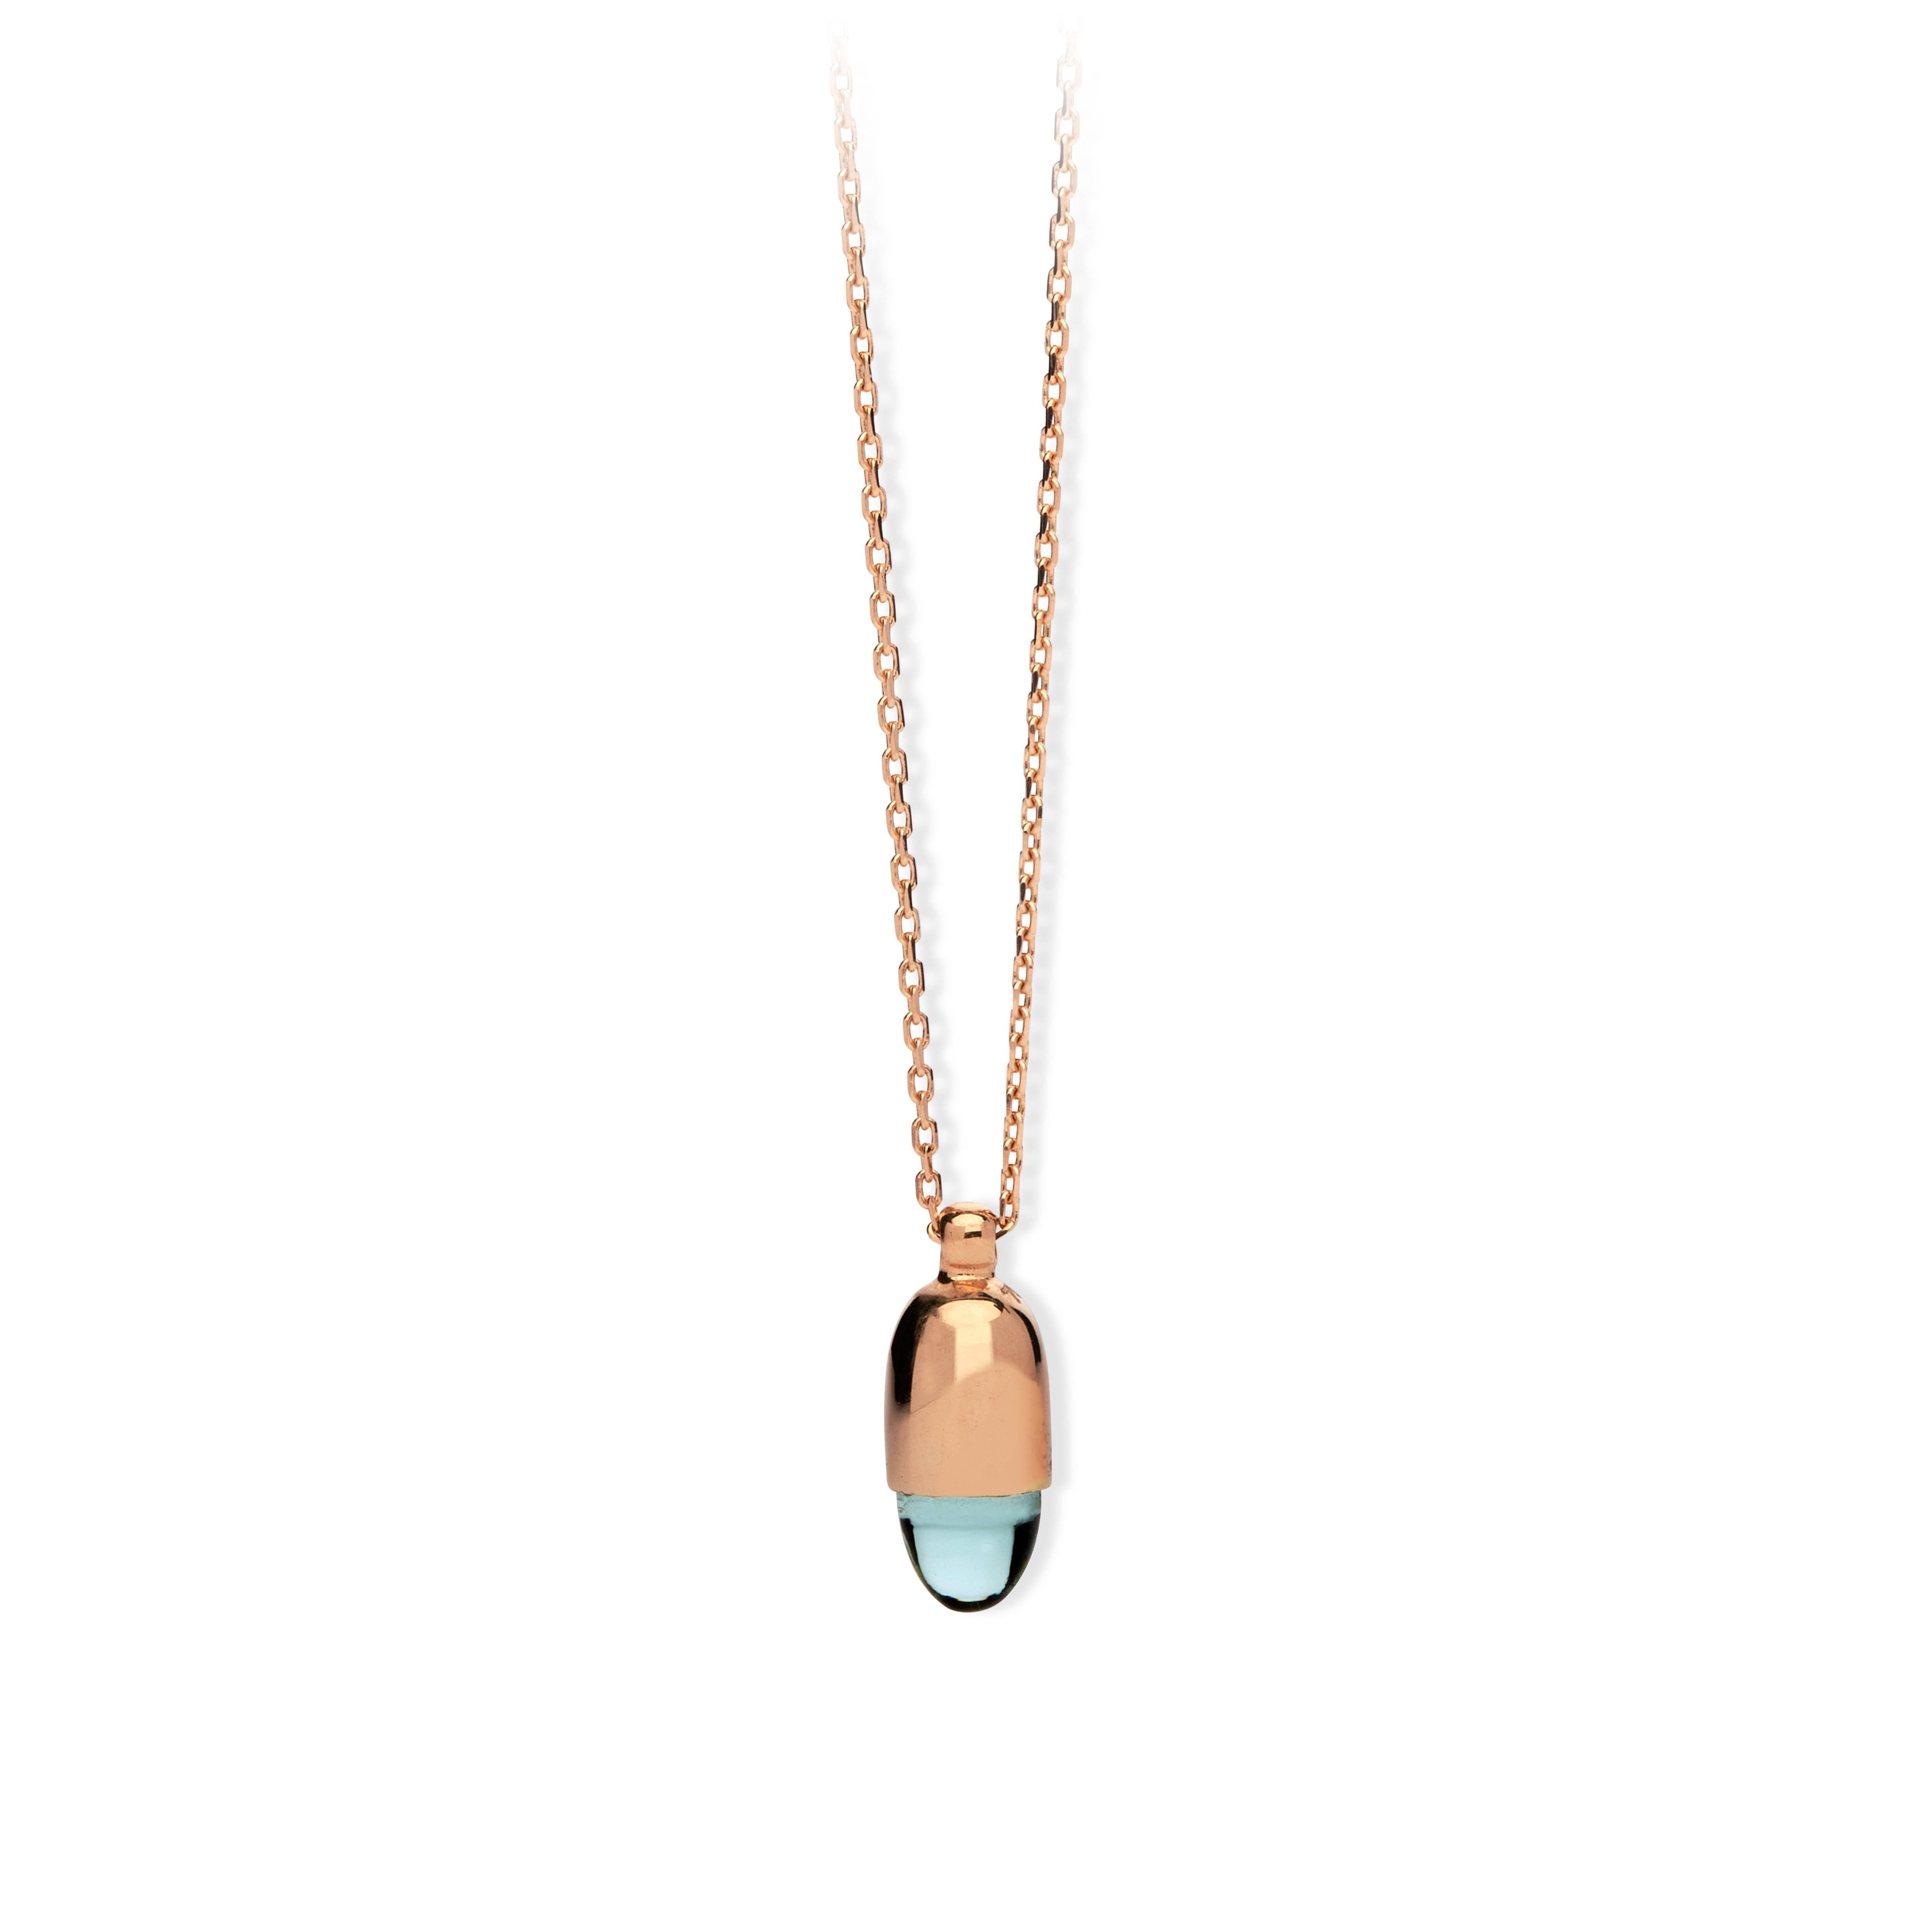 Our cheerful 18ct solid gold pendants, offered in a wide range of colours, are meant to be worn everyday, whatever your occasion. Our preference is to layer them, creating a modern, fun look to suit any outfit. The bullet shaped smooth cut stones